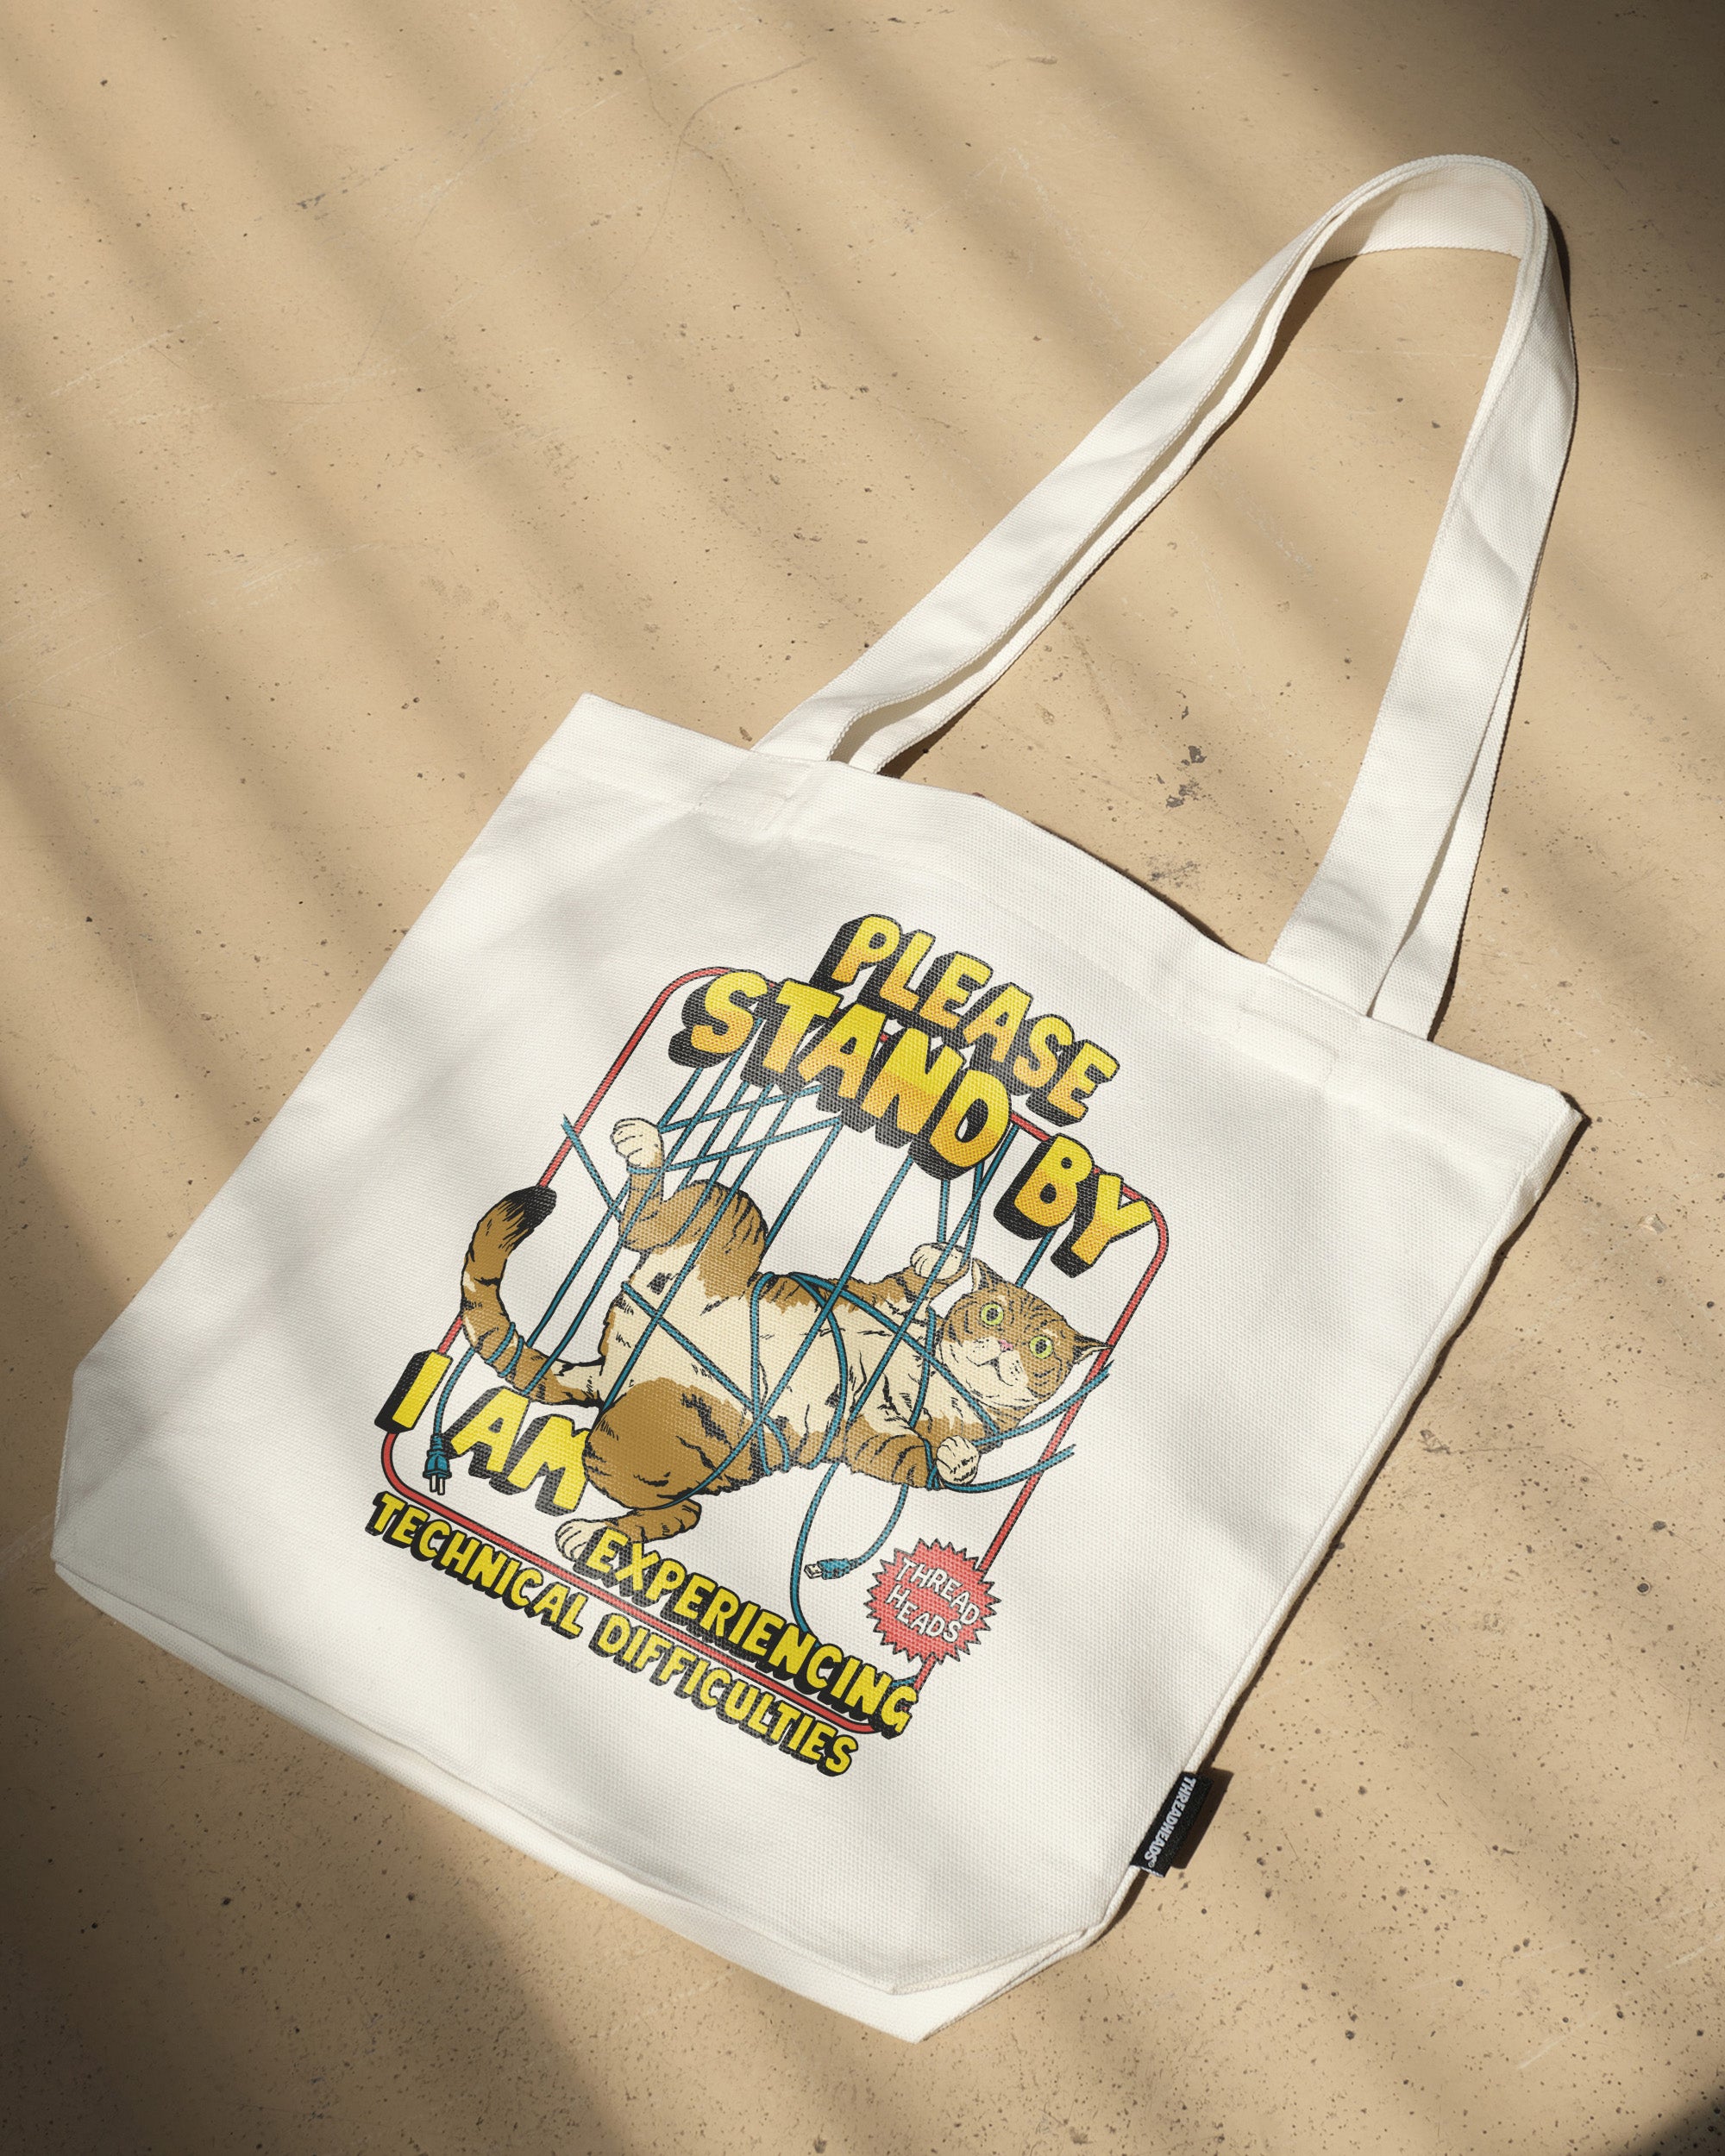 Technical Difficulties Tote Bag